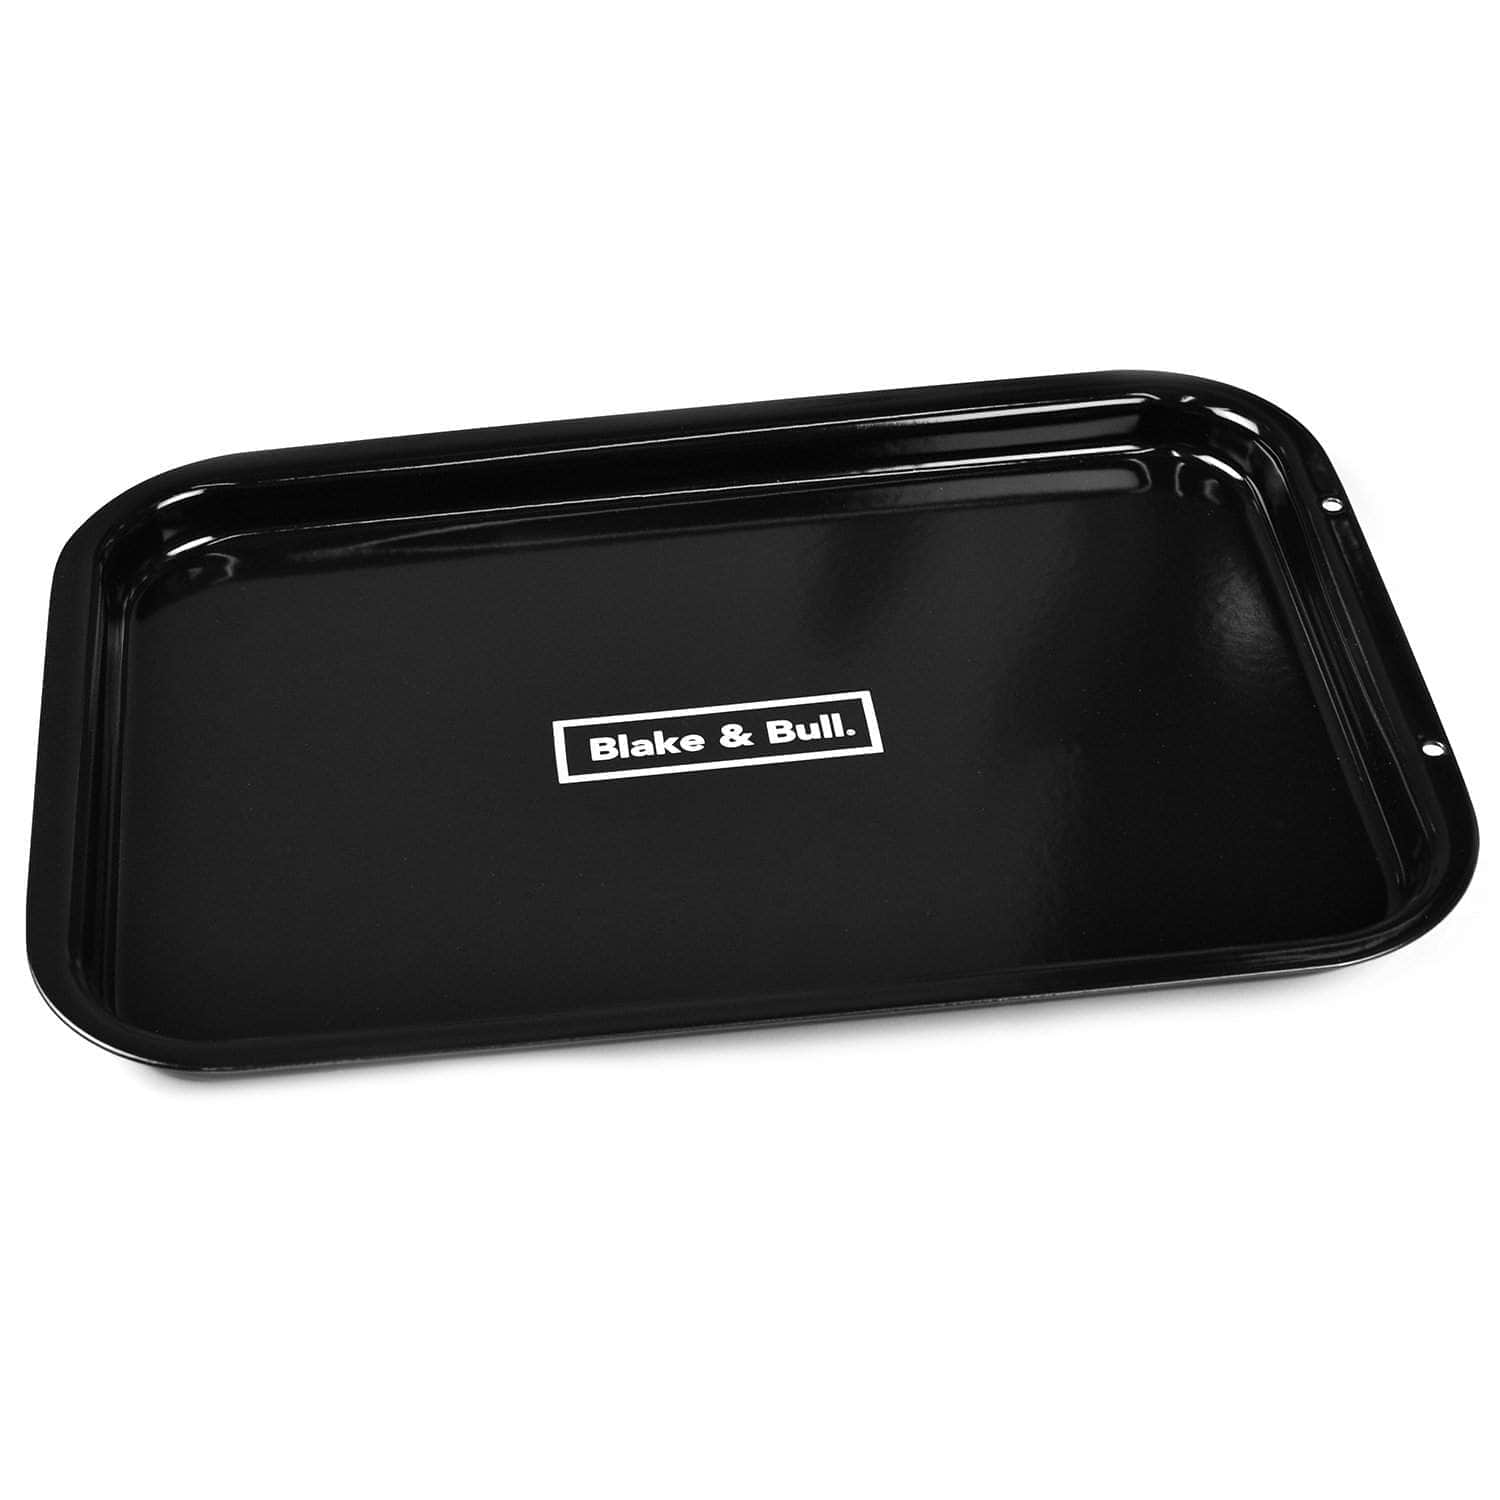 *Not quite perfect* 'Fits on runners' black enamelled baking tray for use with Aga range cookers 'half oven' size